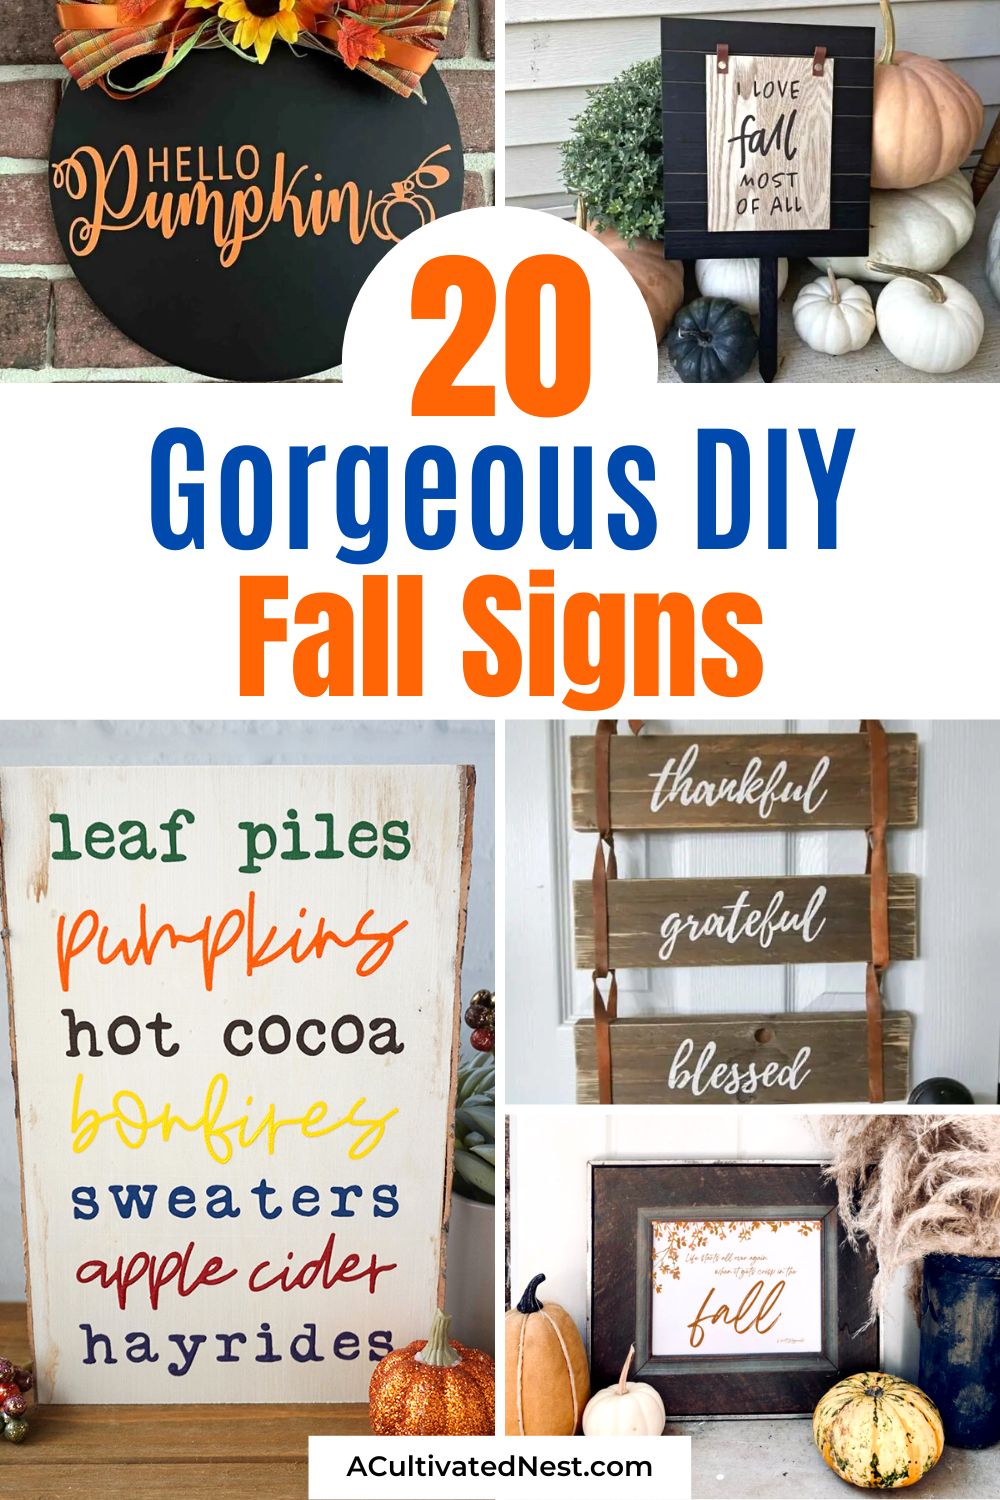 20 Gorgeous DIY Fall Signs- Fall in love with DIY décor this season! Discover stunning DIY fall signs to welcome the autumn spirit into your home. Whether you're a crafting pro or a newbie, these projects will make your space feel cozy and festive. | #FallDIY #AutumnHomeDecor #fallDecor #diyProjects #ACultivatedNest